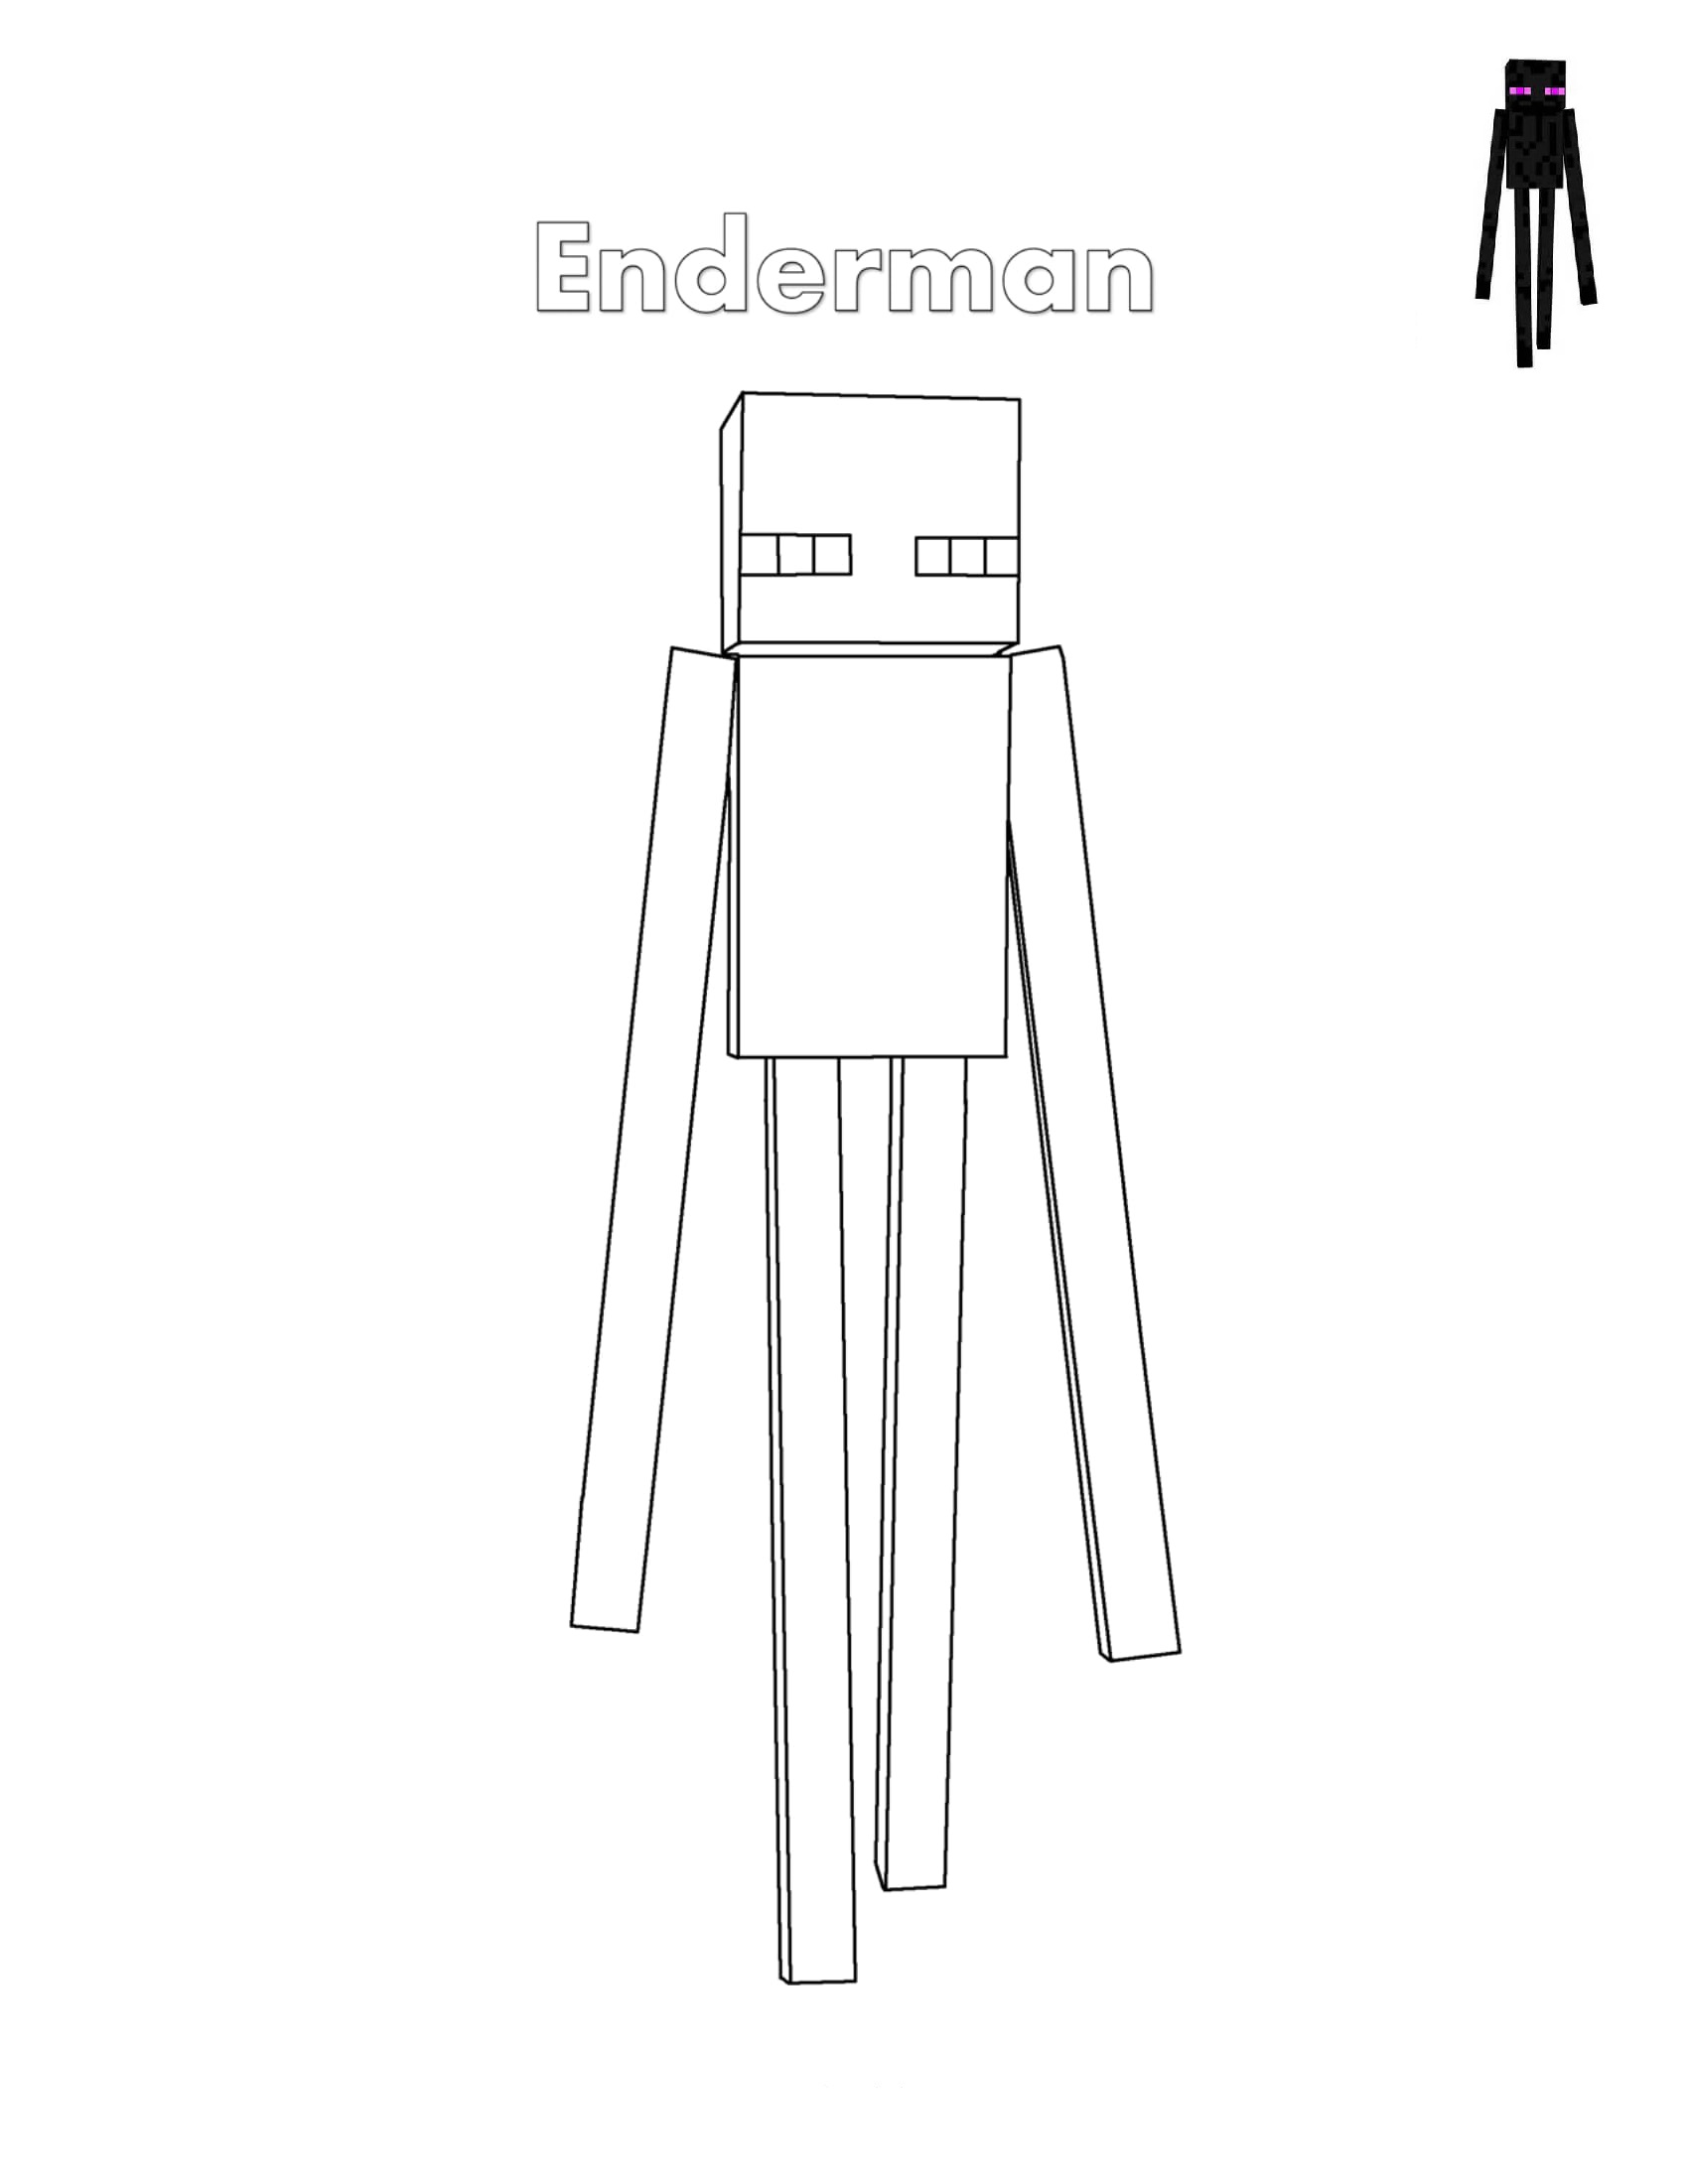 Enderman Minecraft Coloring Page